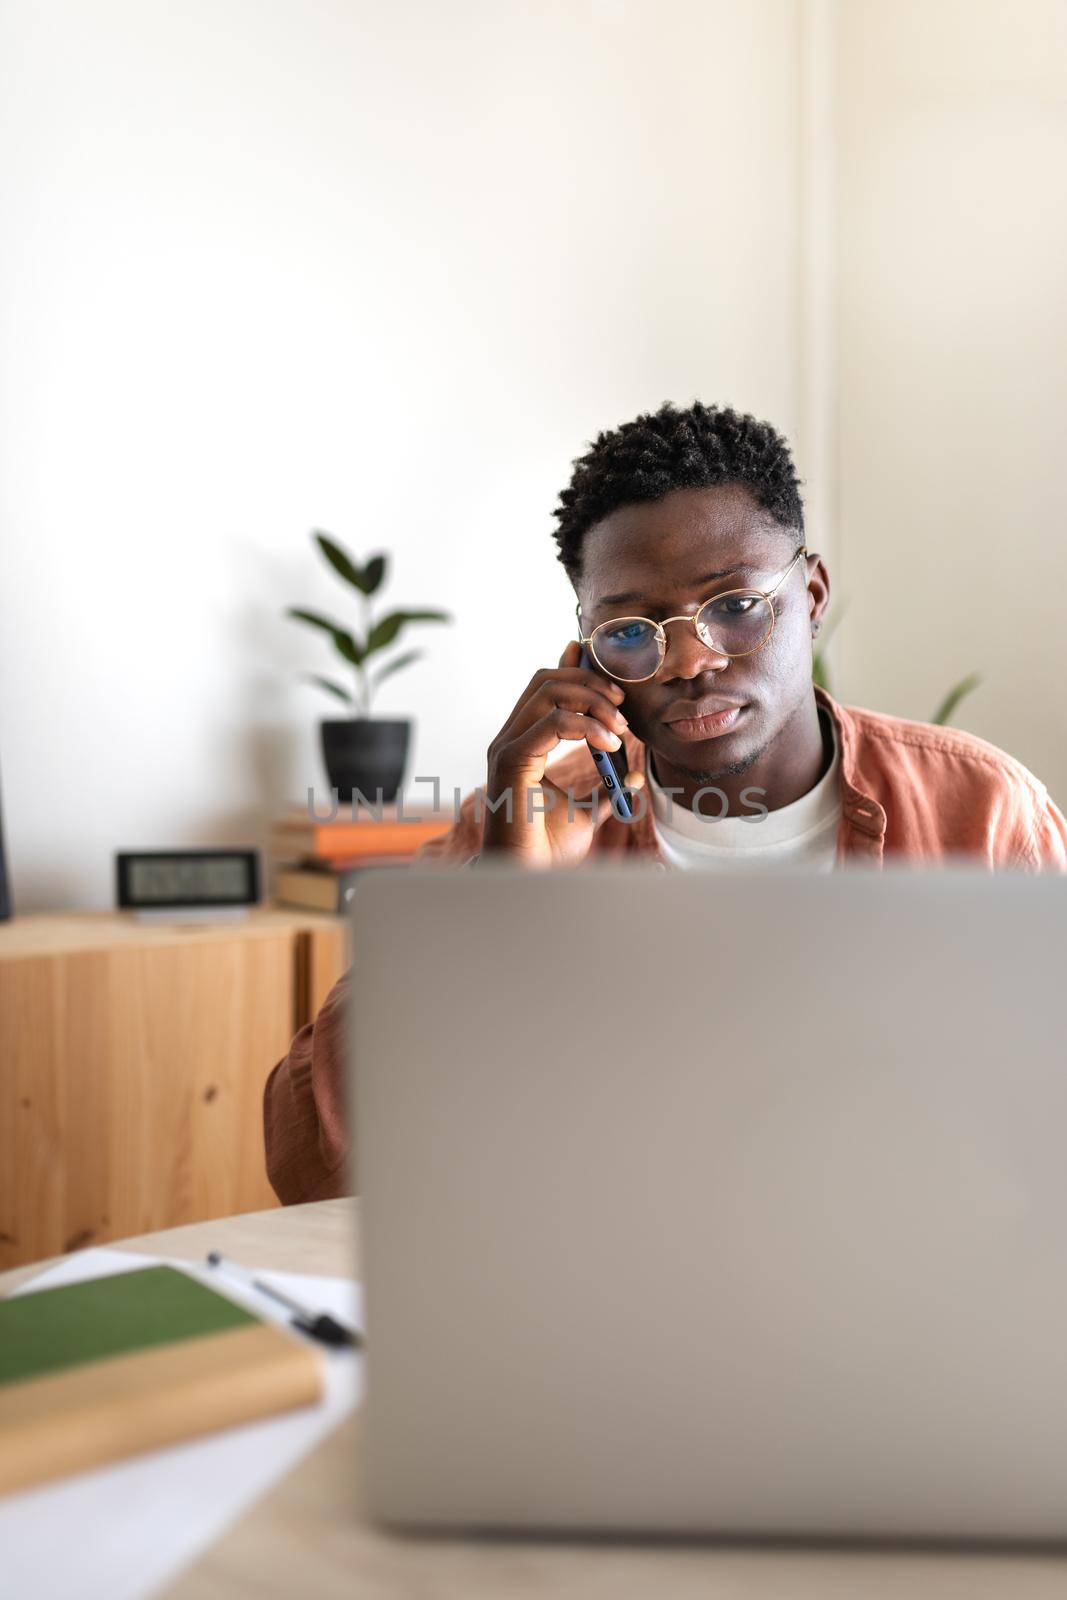 Black male entrepreneur working with laptop at home office talking with mobile phone. Copy space. Working from home concept.